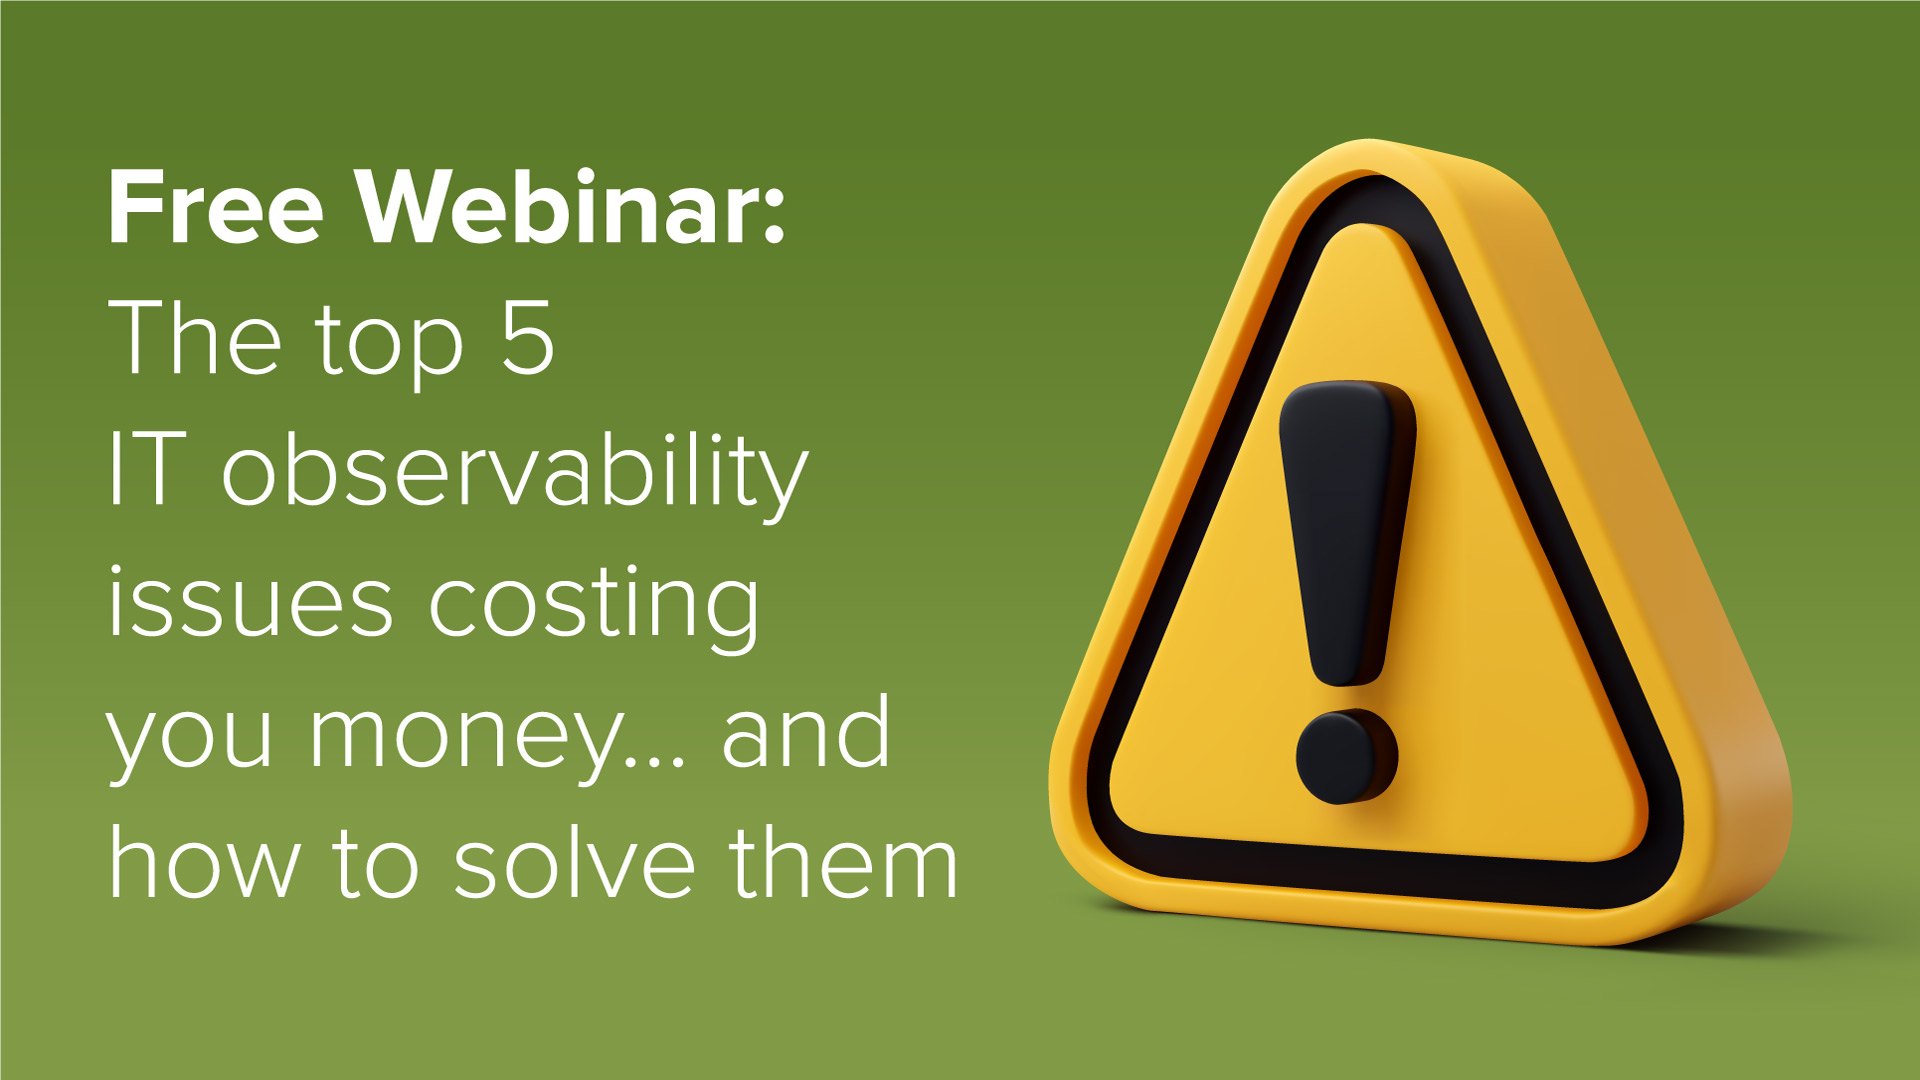 Free Webinar Session: The Top 5 IT Observability Issues Costing You Money